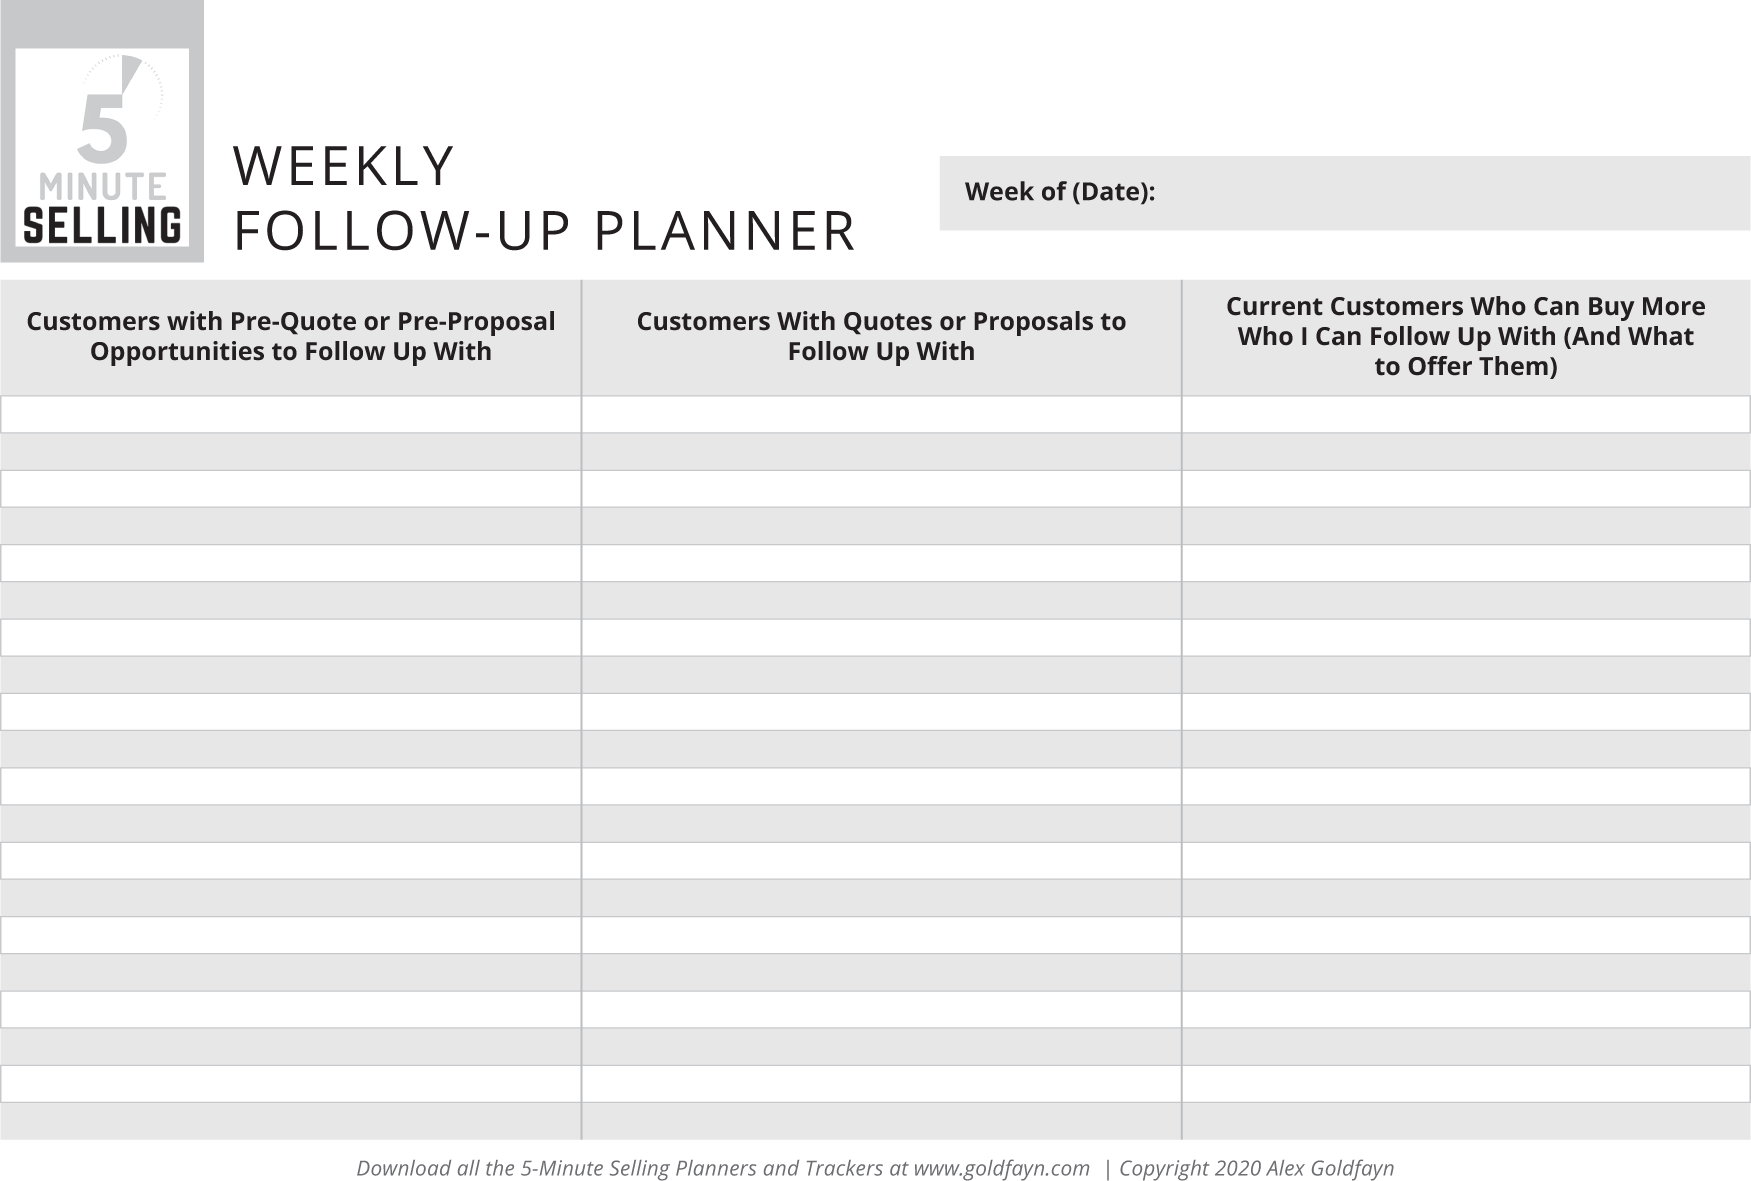 A 5-Minute Selling Weekly Follow-Up Planner to write names in all three columns. The first column is for pre-quote opportunities, the second is for quotes to follow up on, and the third is for customers who can buy more.